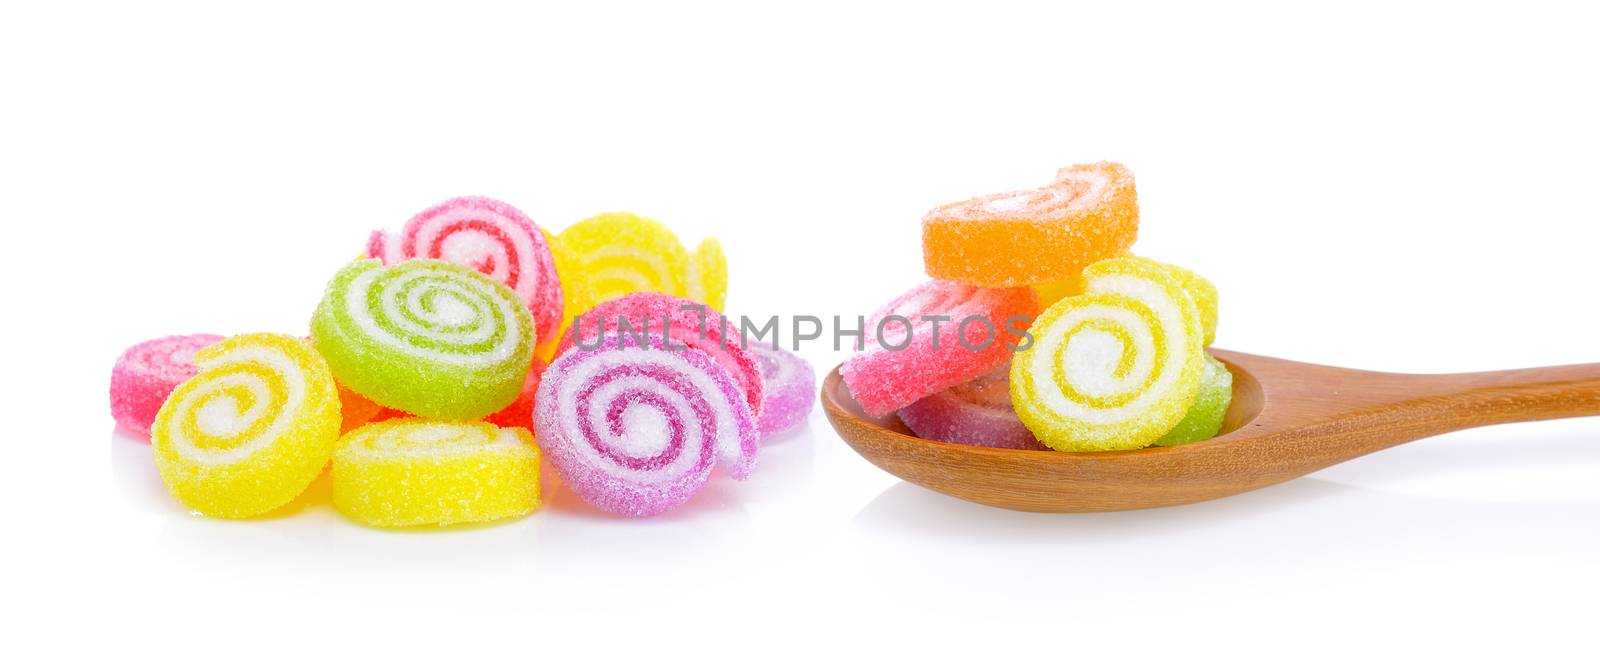 Jelly sweet, flavor fruit, candy dessert colorful on sugar.